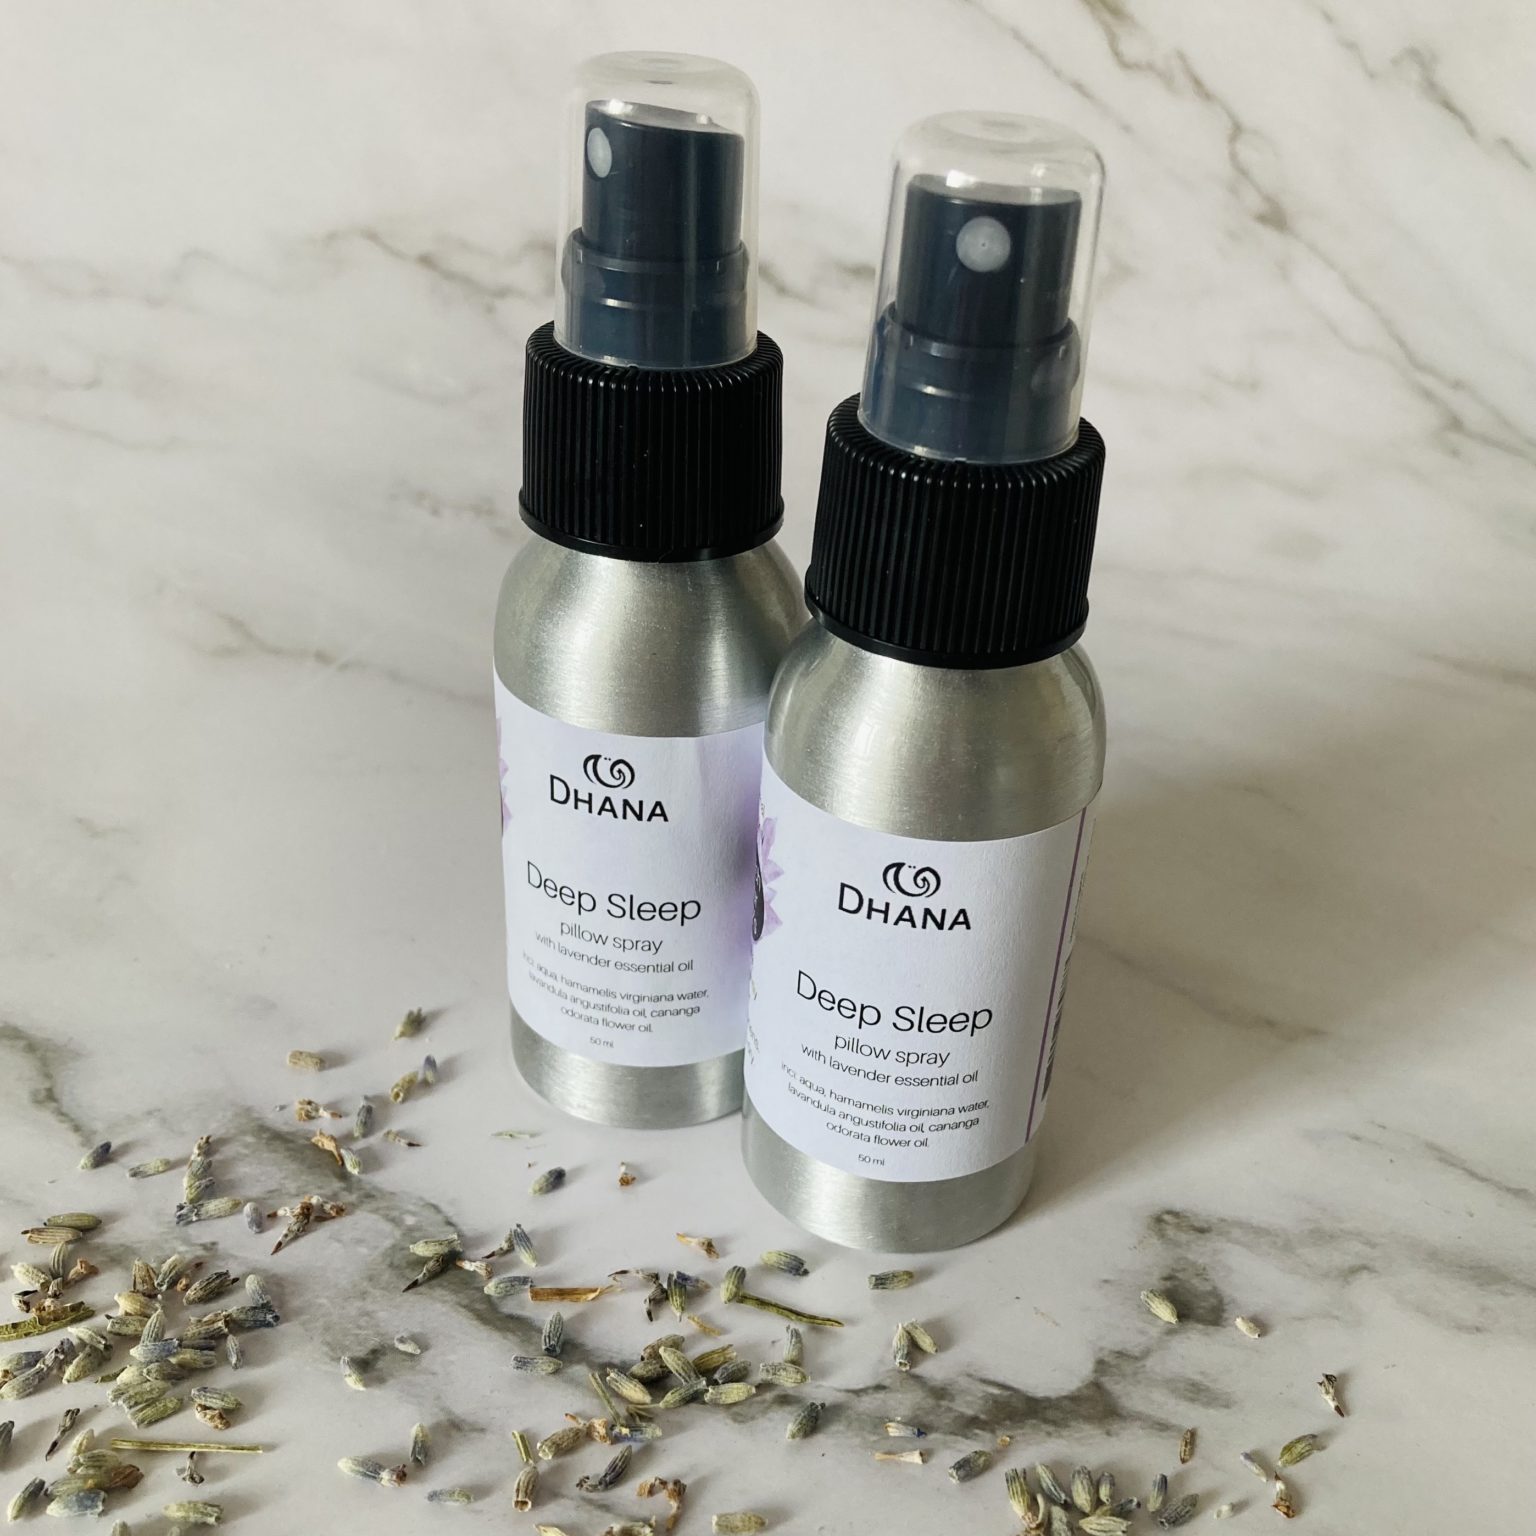 aluminum bottles of deep sleep pillow spray with lavender and marble background